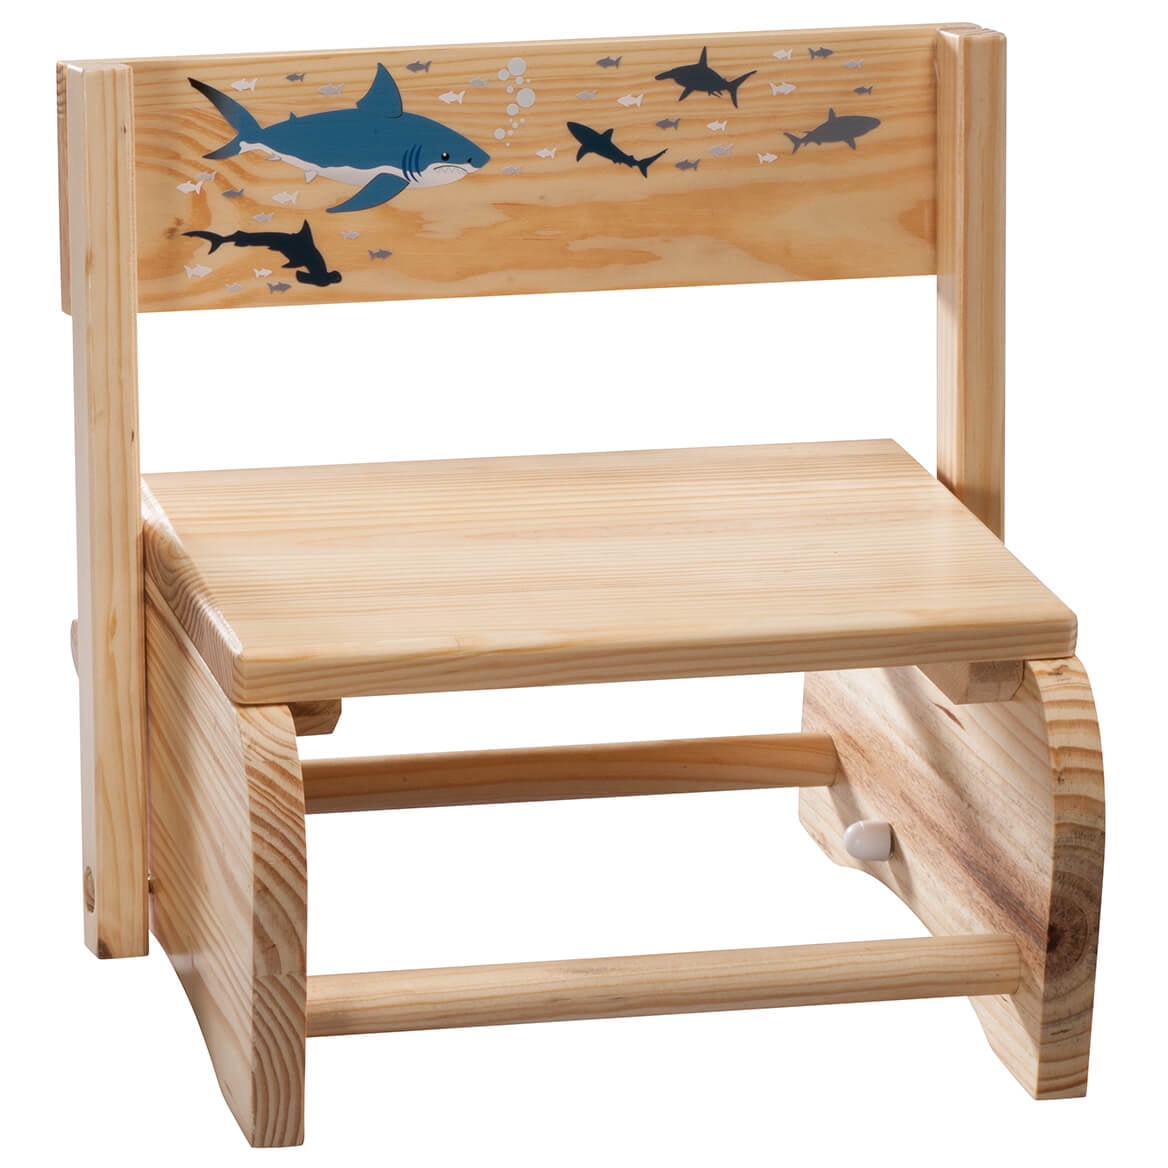 Personalized Shark Tank Childrens Step and Storage Stool 